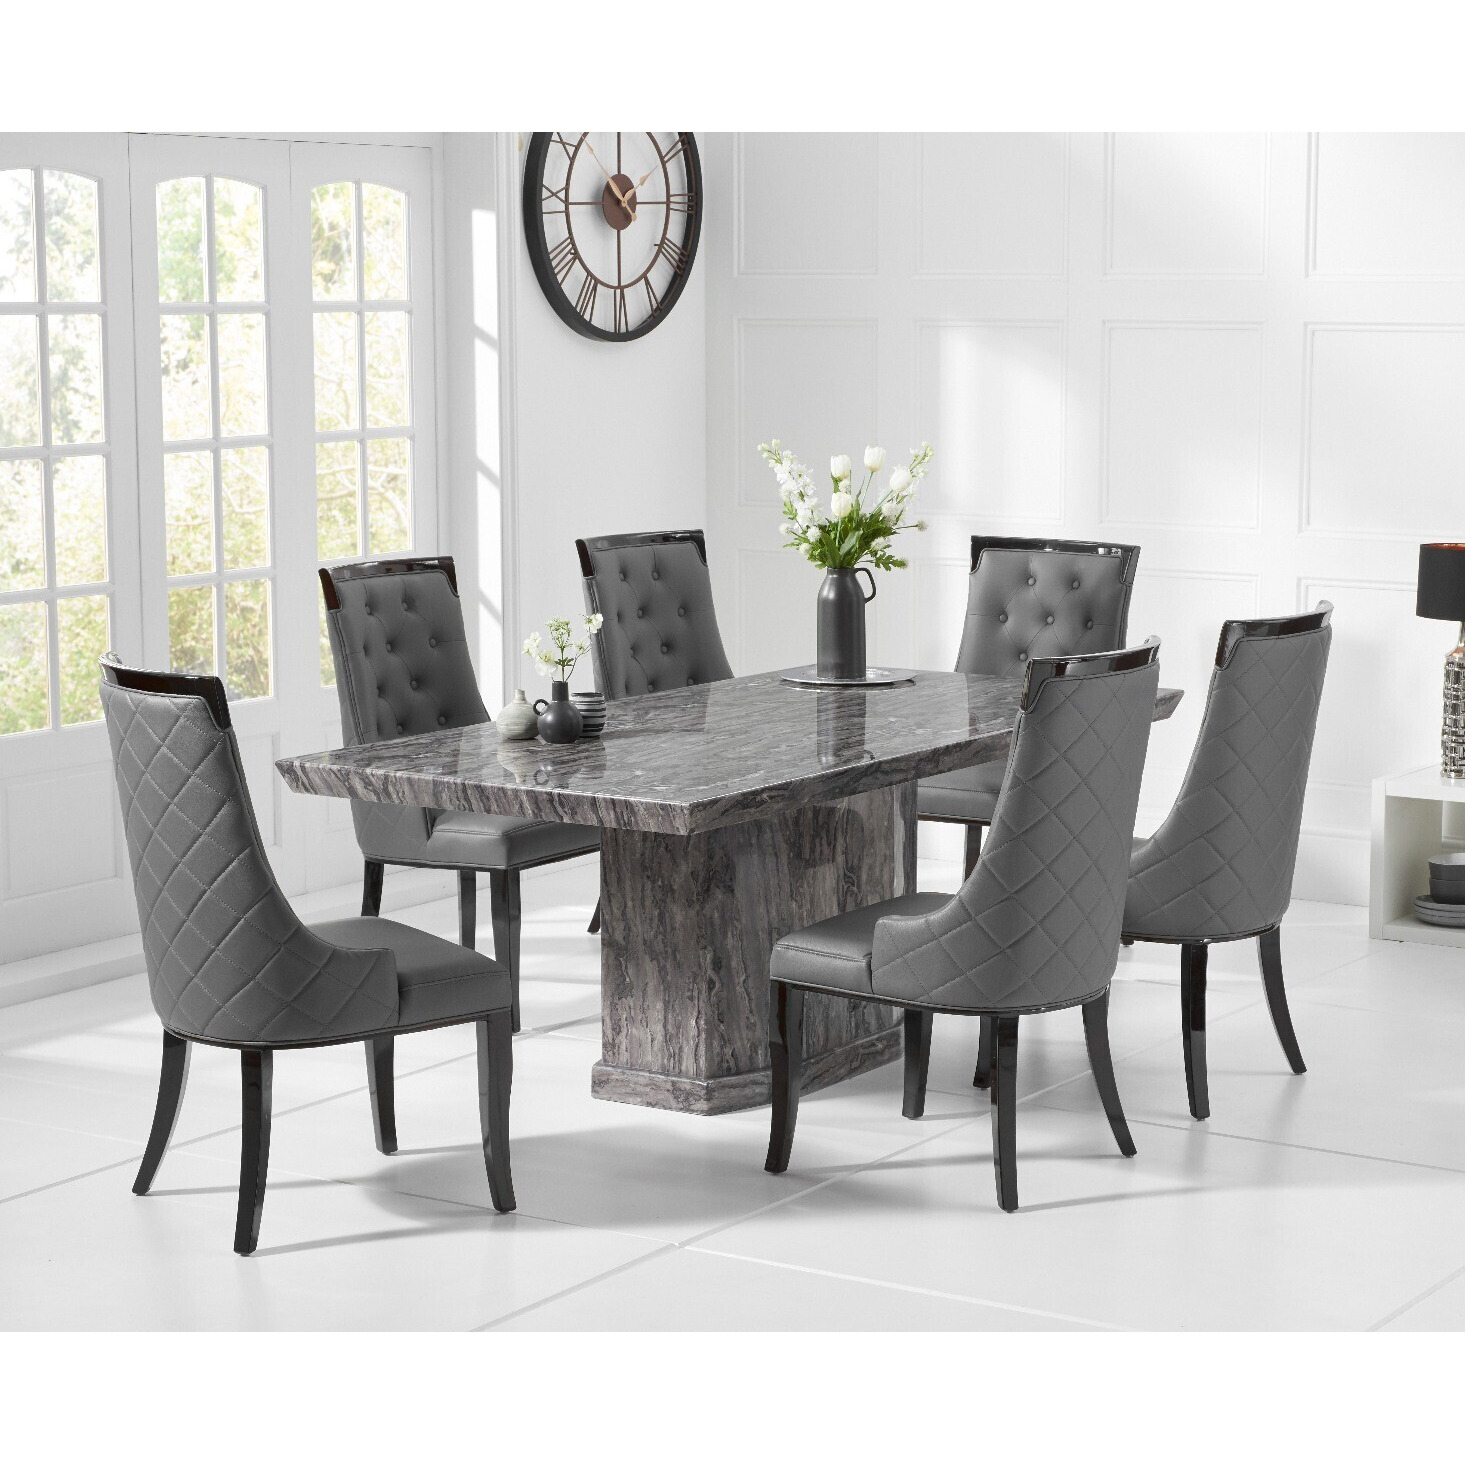 Carvelle 200cm Dark Grey Pedestal Marble Dining Table With 6 Cream Francesca Chairs